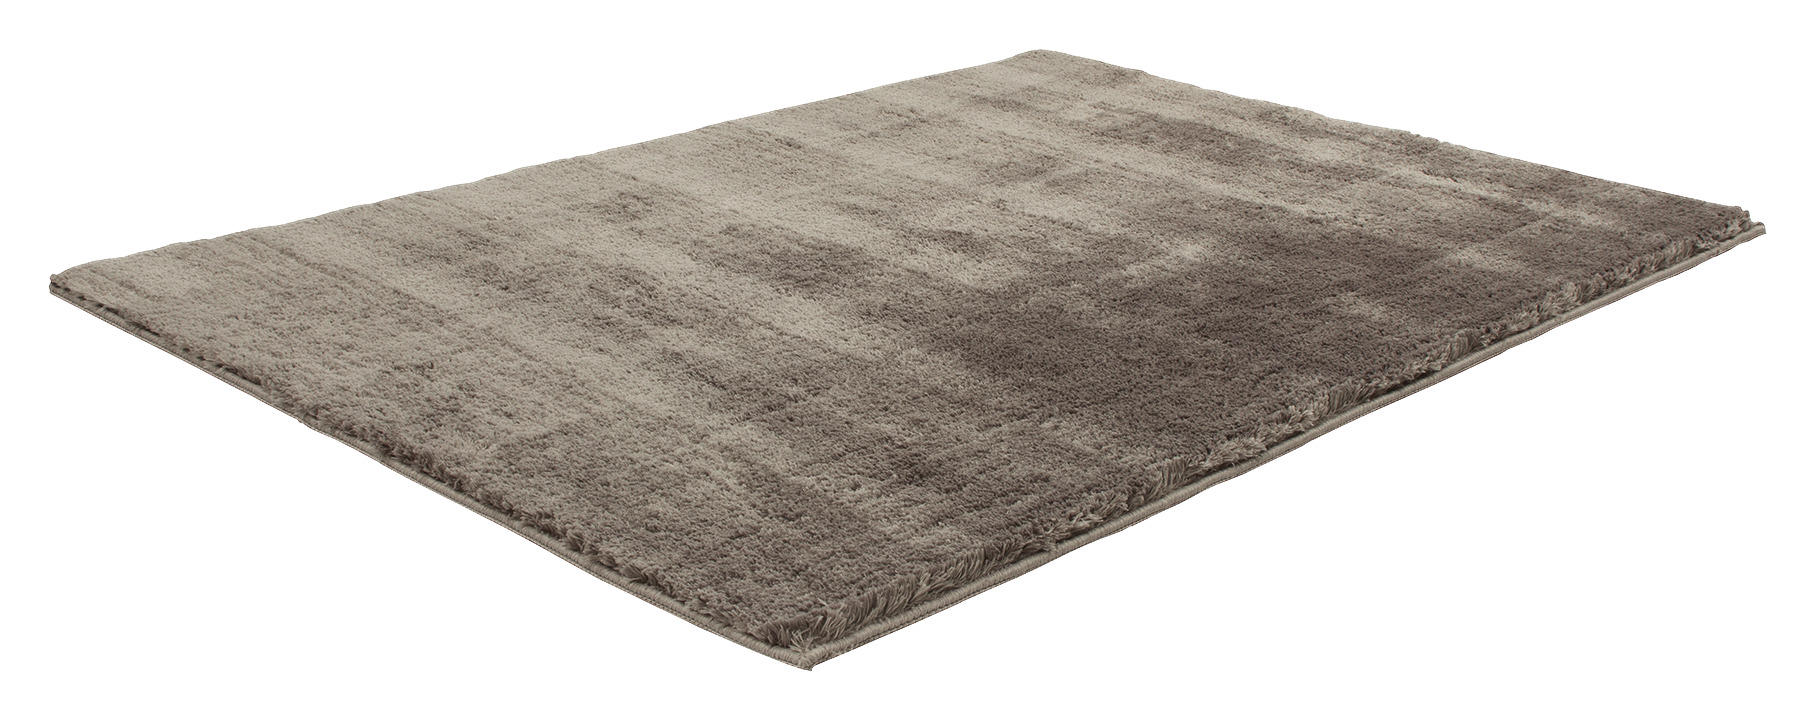 Teppich My Conveniently Taupe B/l: Ca. 120x170 Cm My Conveniently - Taupe (120,00/170,00cm)